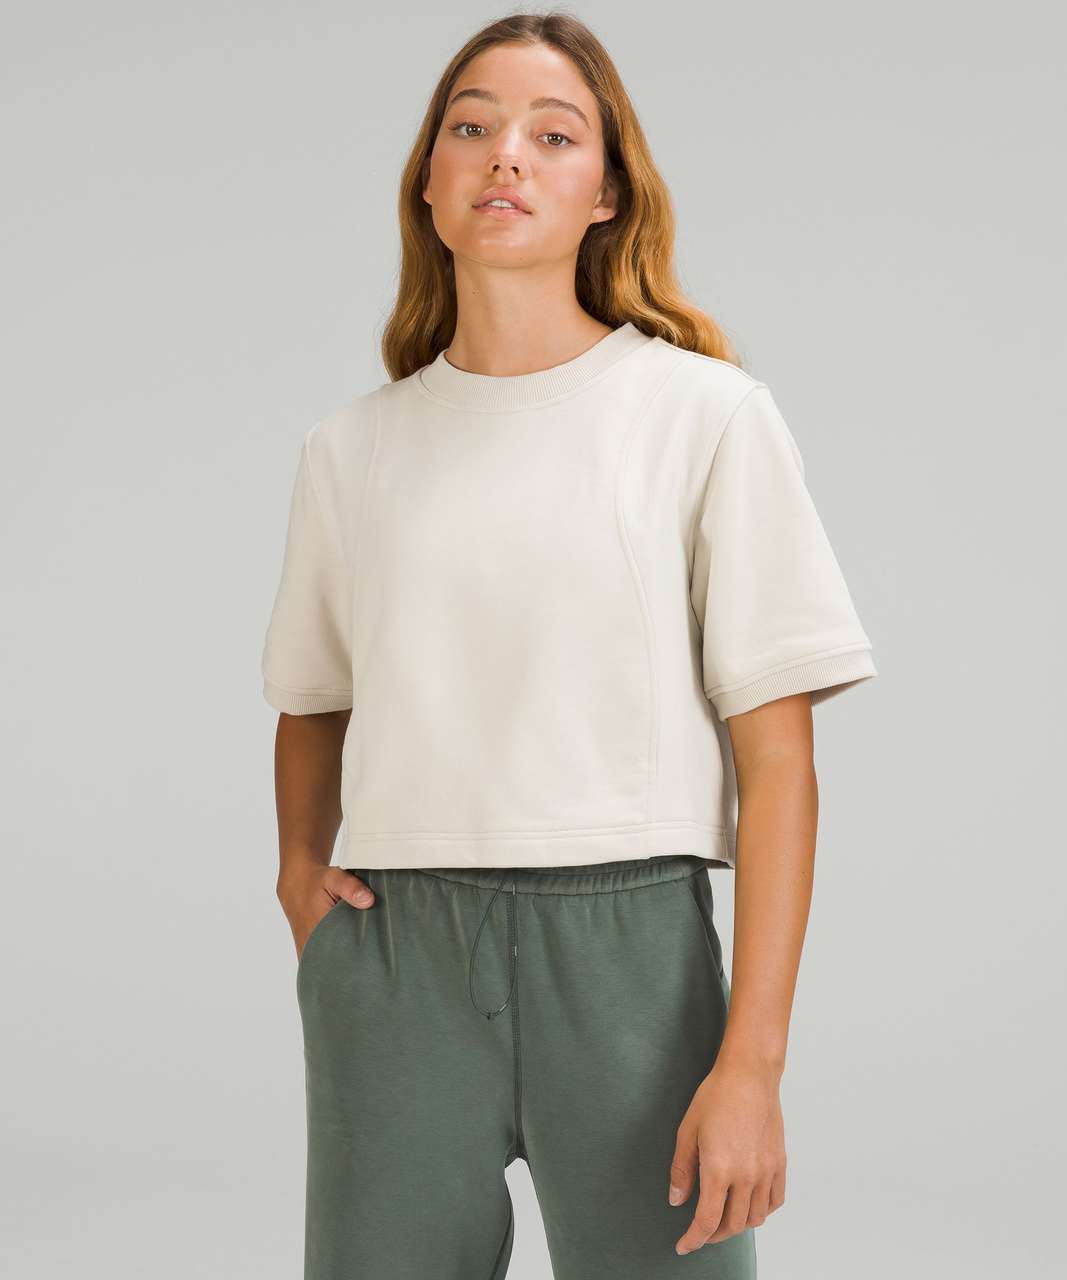 Lululemon Cotton French Terry + Swift T-Shirt - Natural Ivory